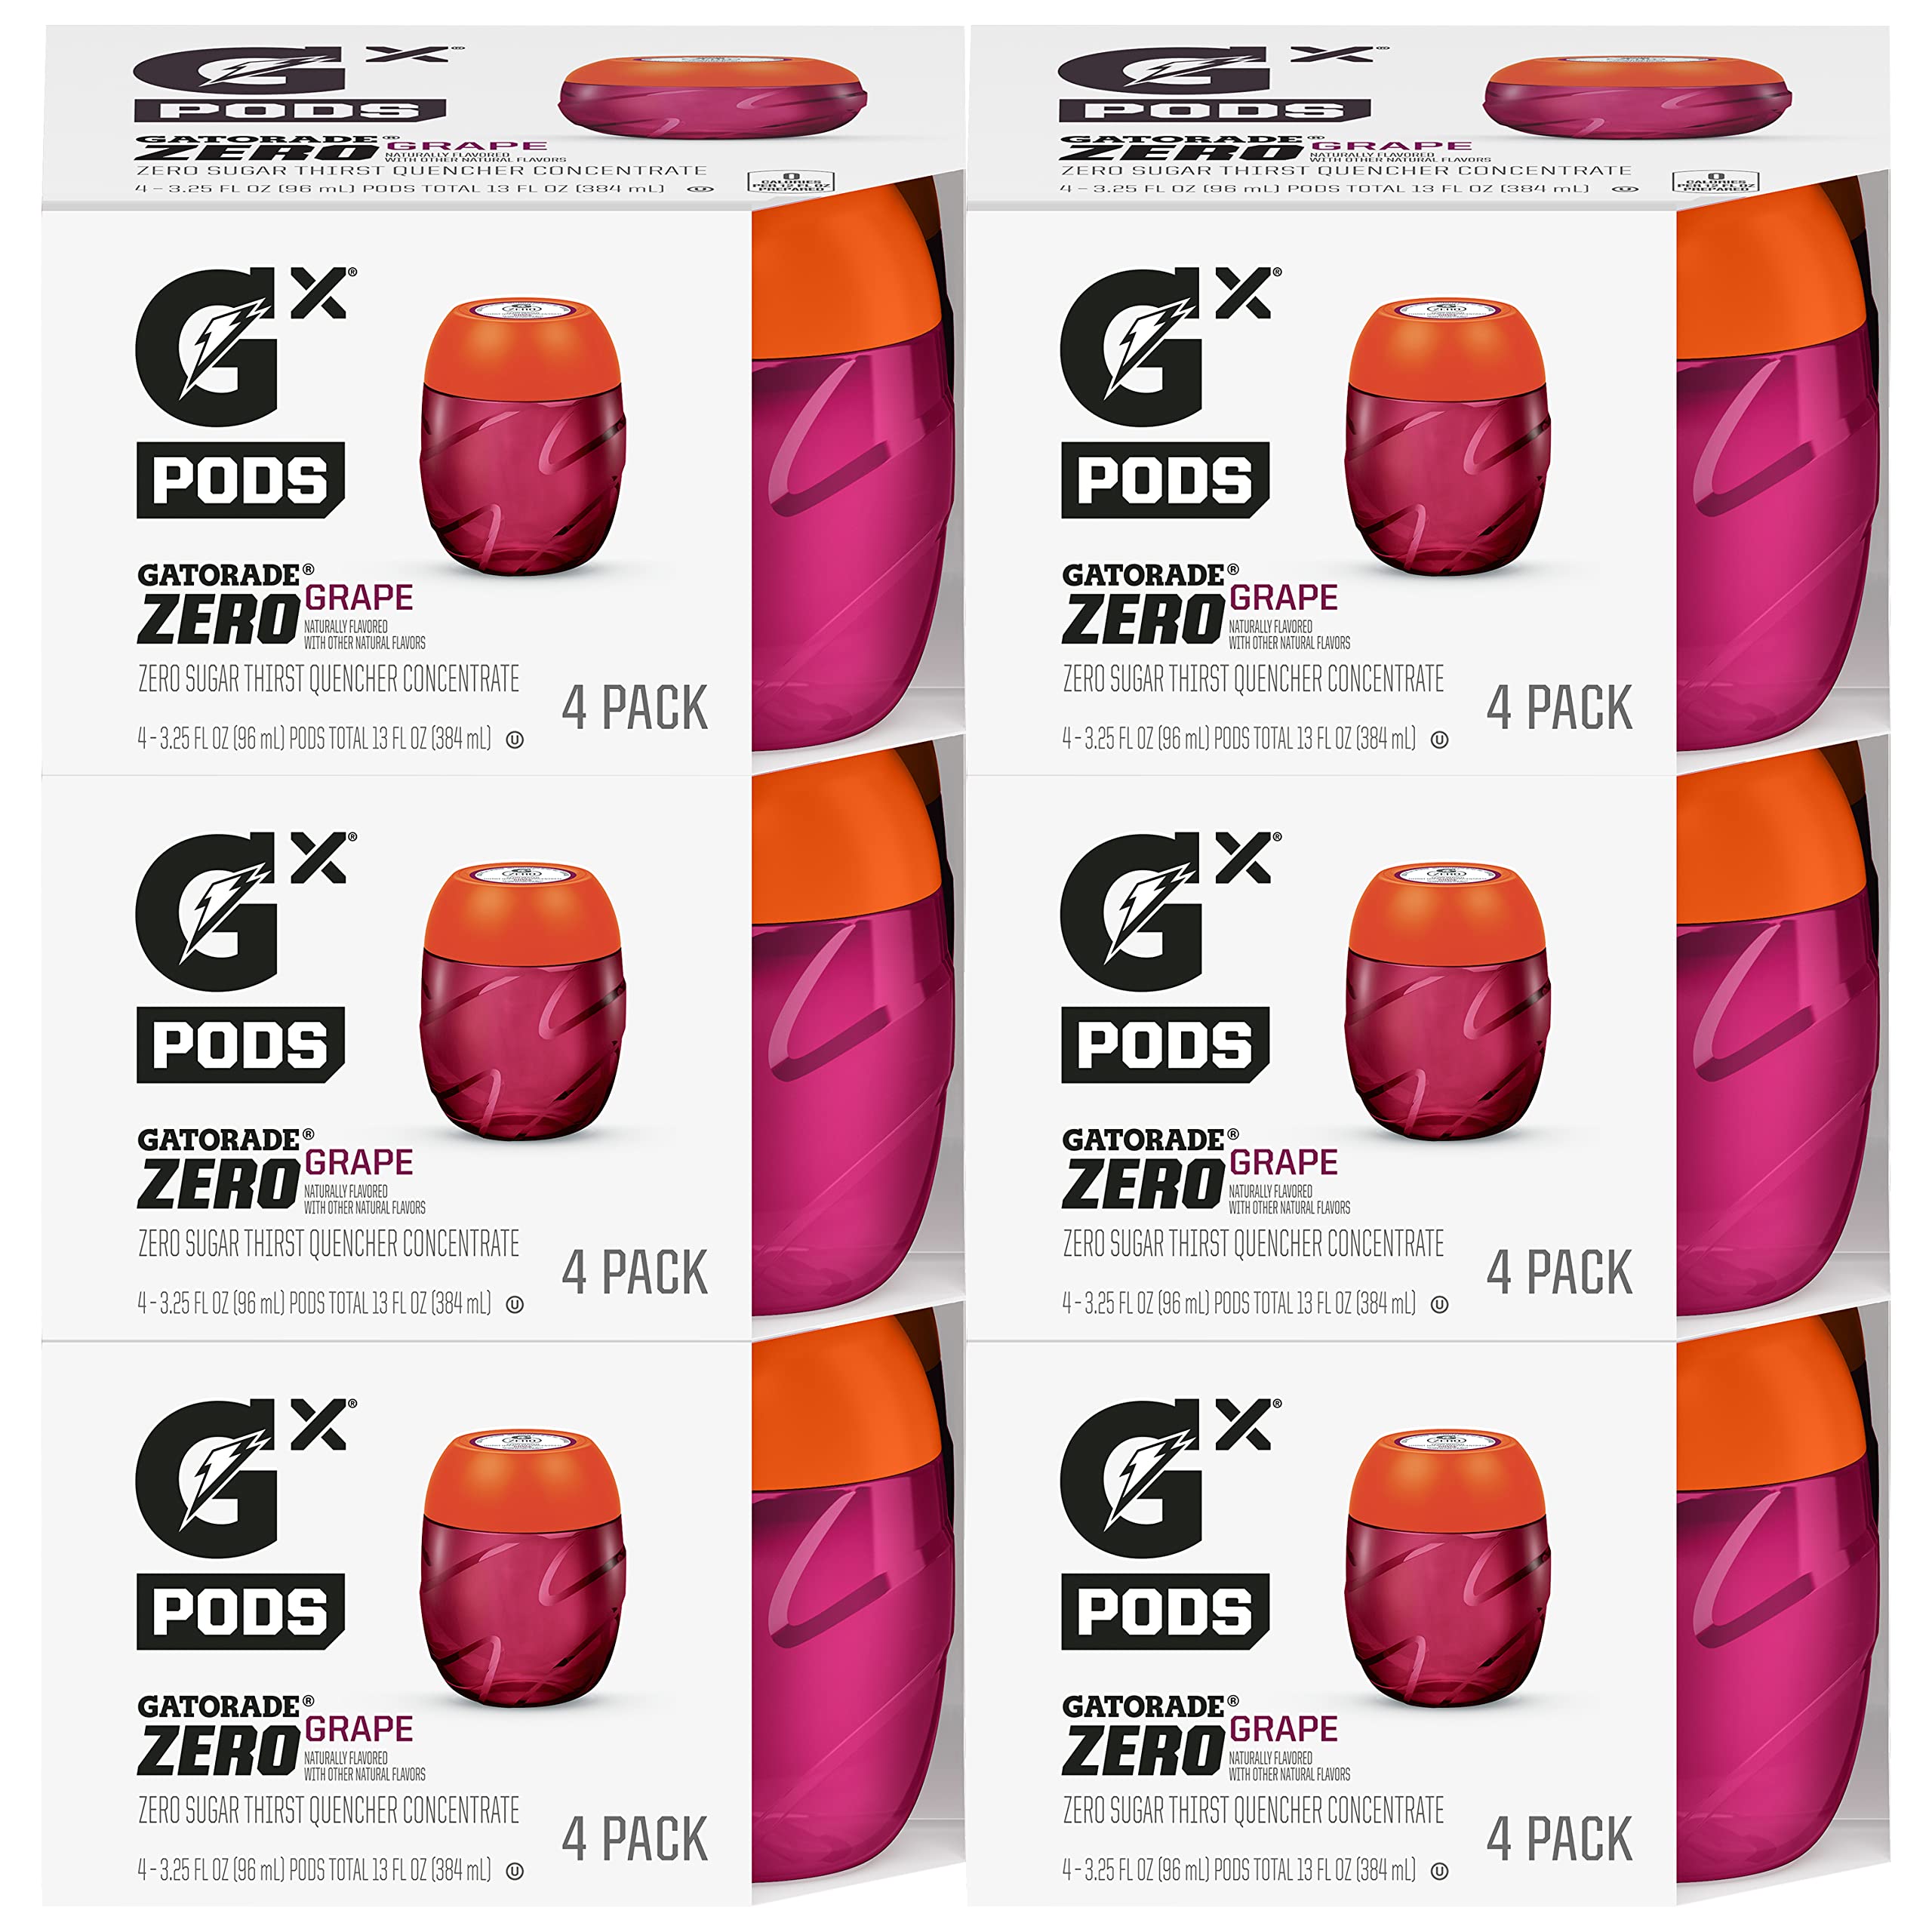 24-Count Gatorade Gx To Go Pods Hydration System (Various Flavors) $21.84 ($0.91 ea)  w/ S&S + Free Shipping